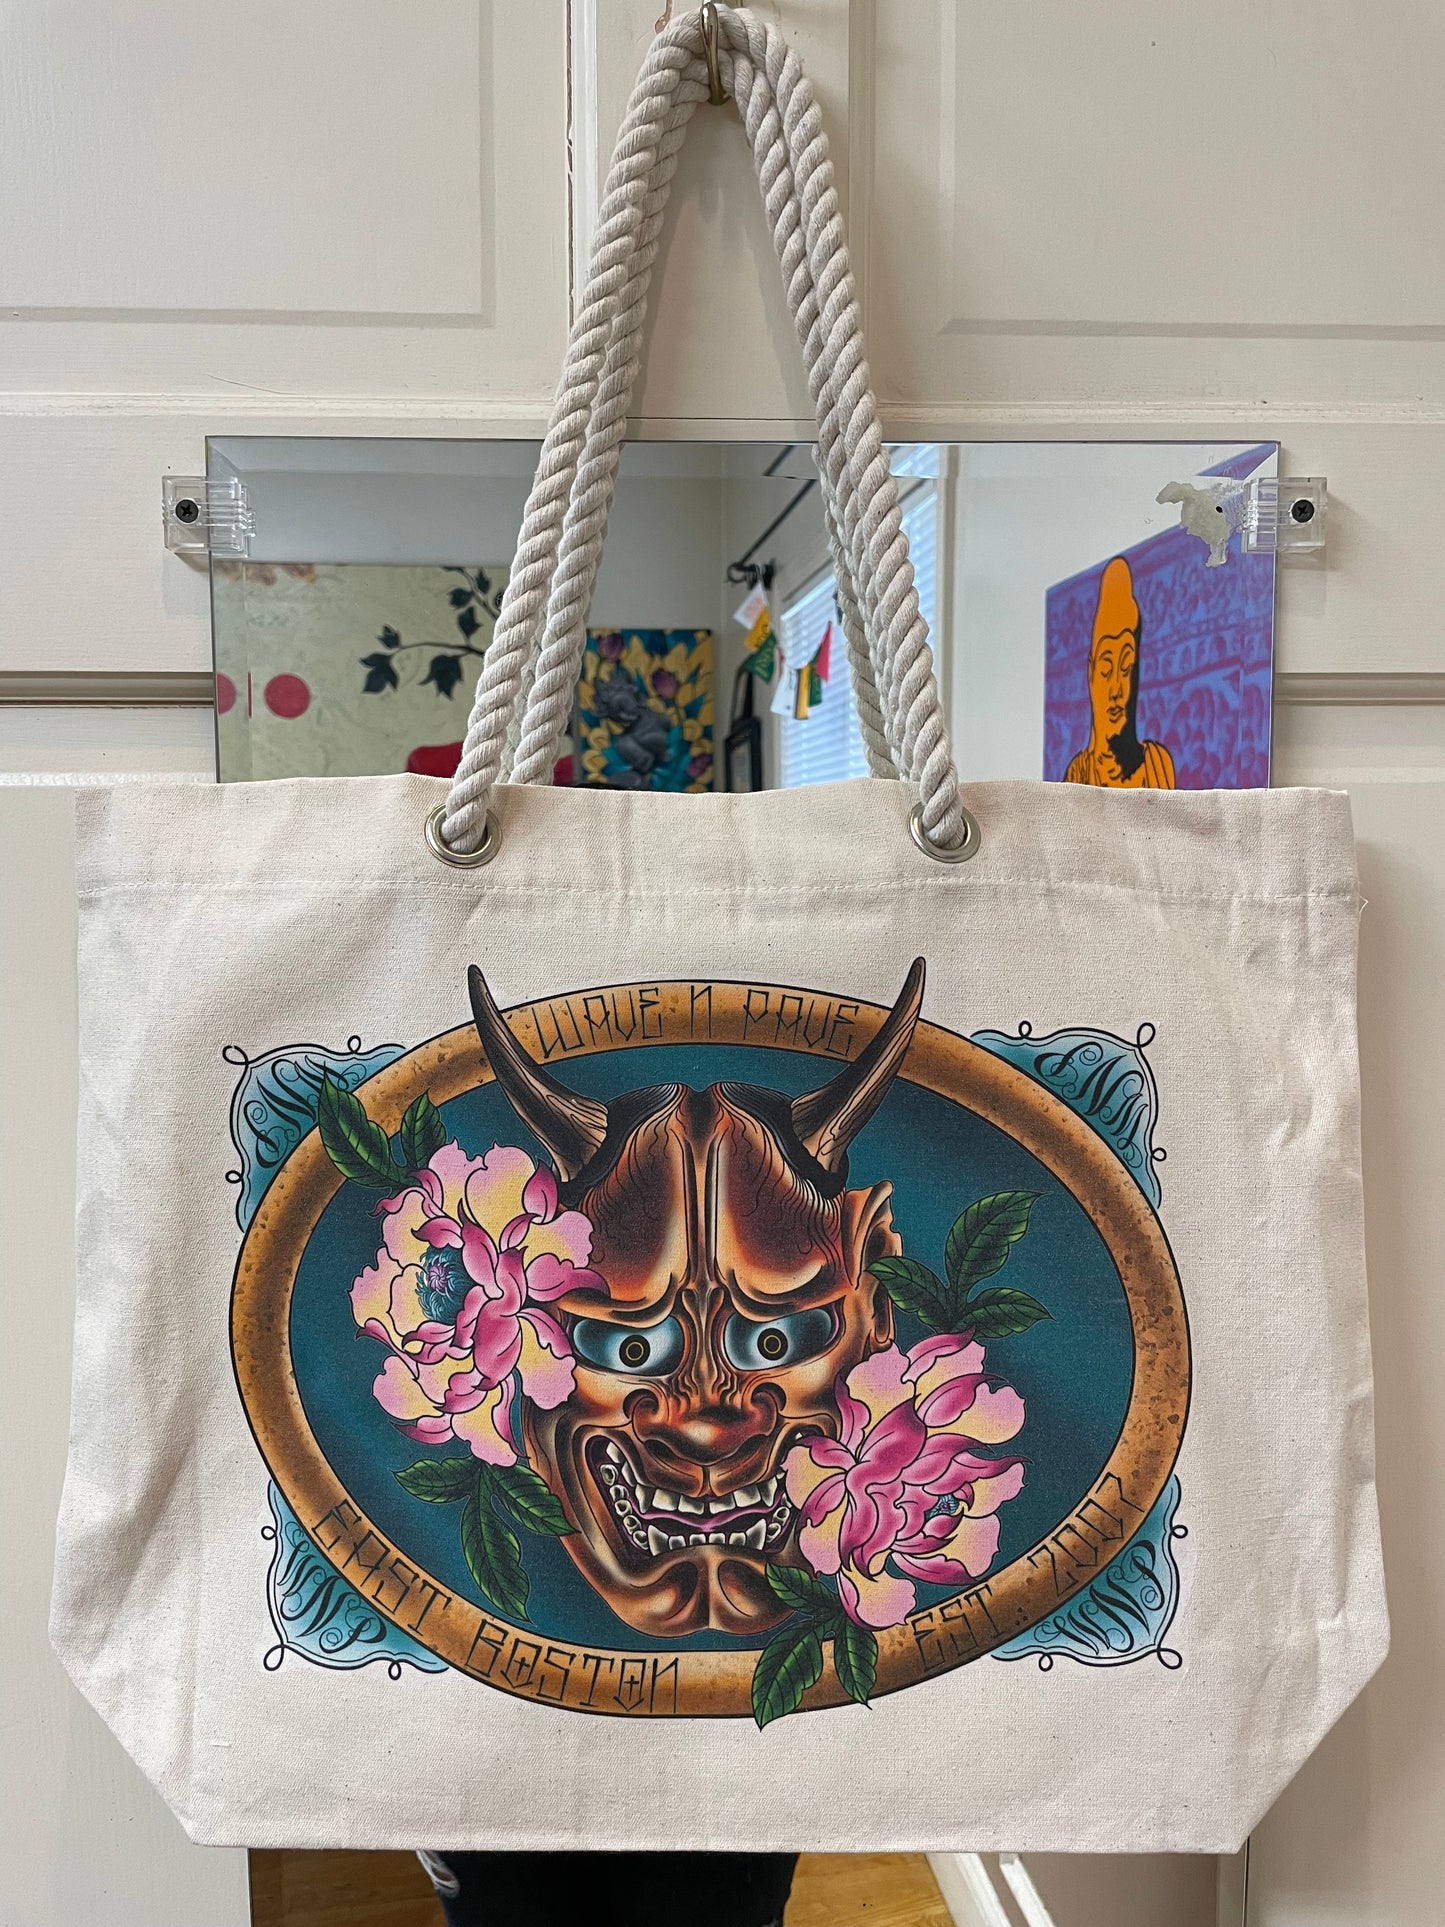 Original Artwork Canvas Tote Bag- 11 styles to choose from!